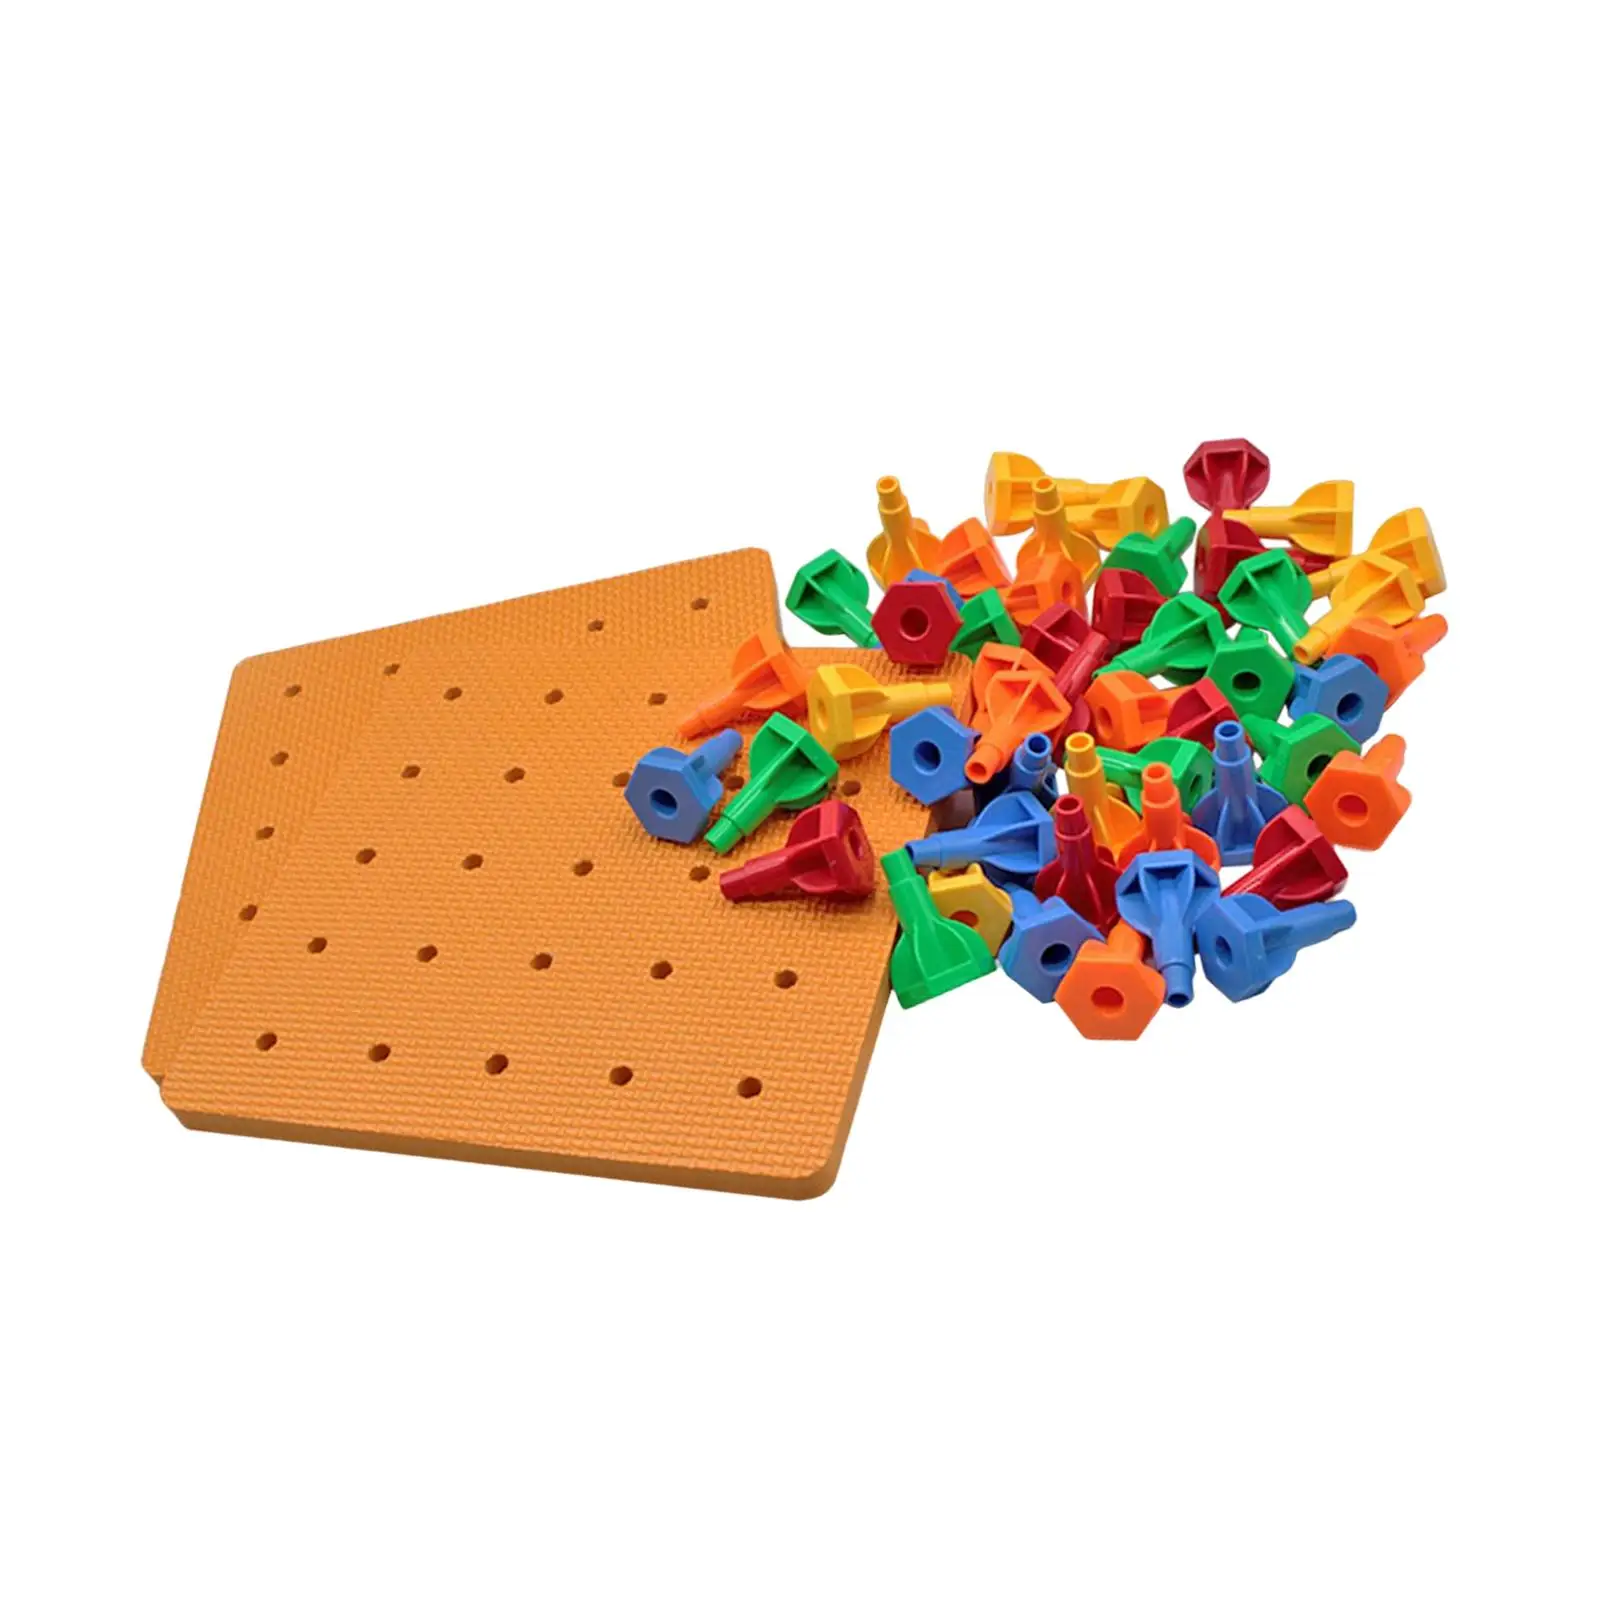 Peg Board Toys Best Gifts Educational Toys for Girls Boys Kids Children Toddlers